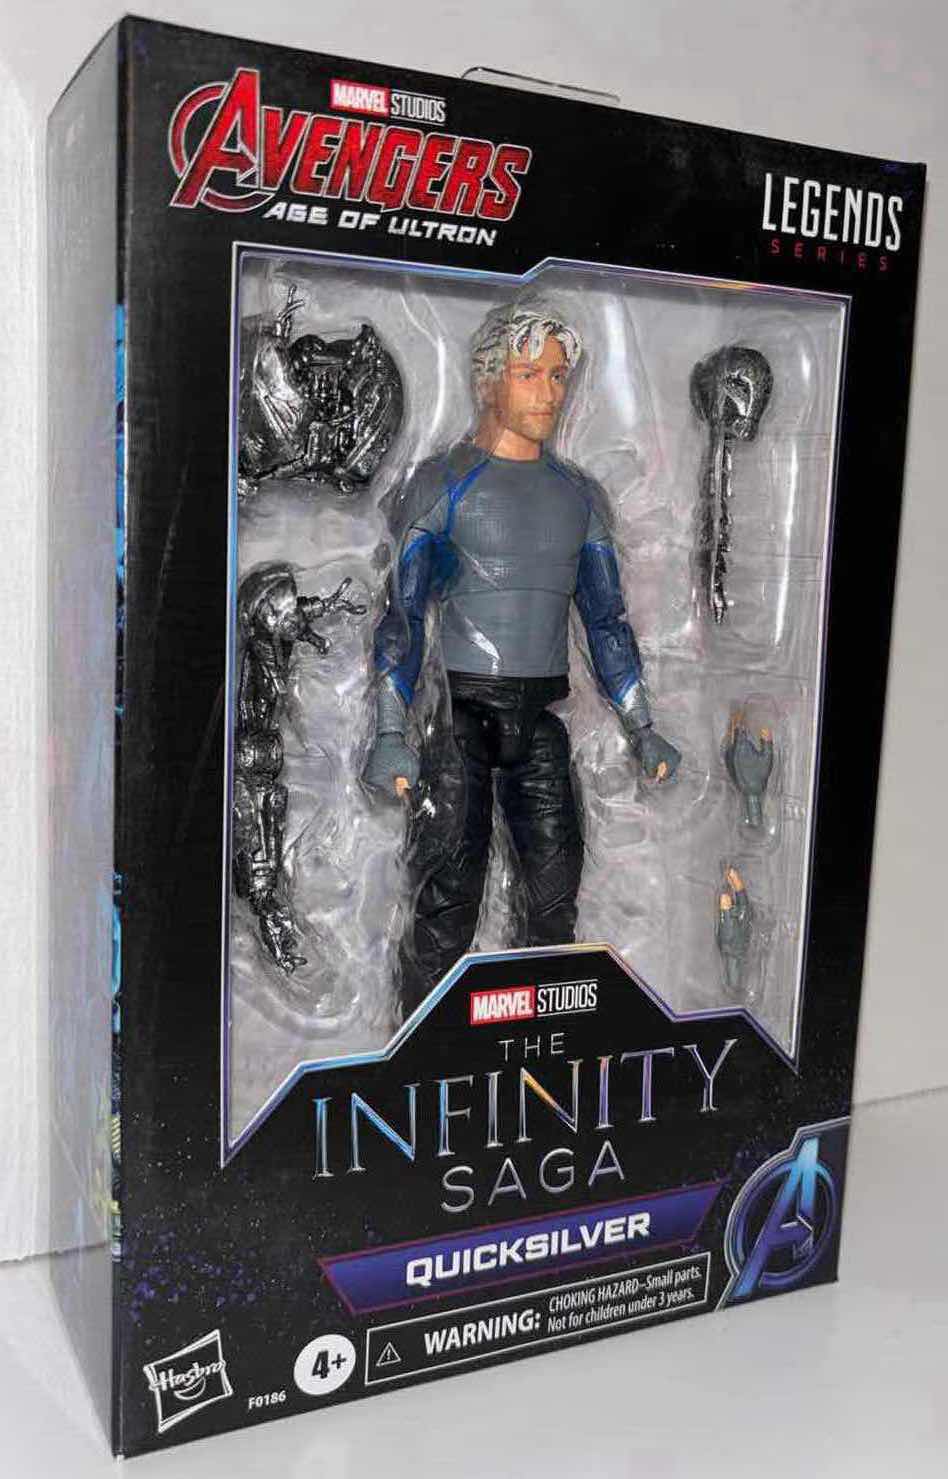 Photo 1 of NEW MARVEL STUDIOS AVENGERS AGE OF ULTRON LEGENDS SERIES ACTION FIGURE & ACCESSORIES, THE INFINITY SAGA “QUICKSILVER” (1)